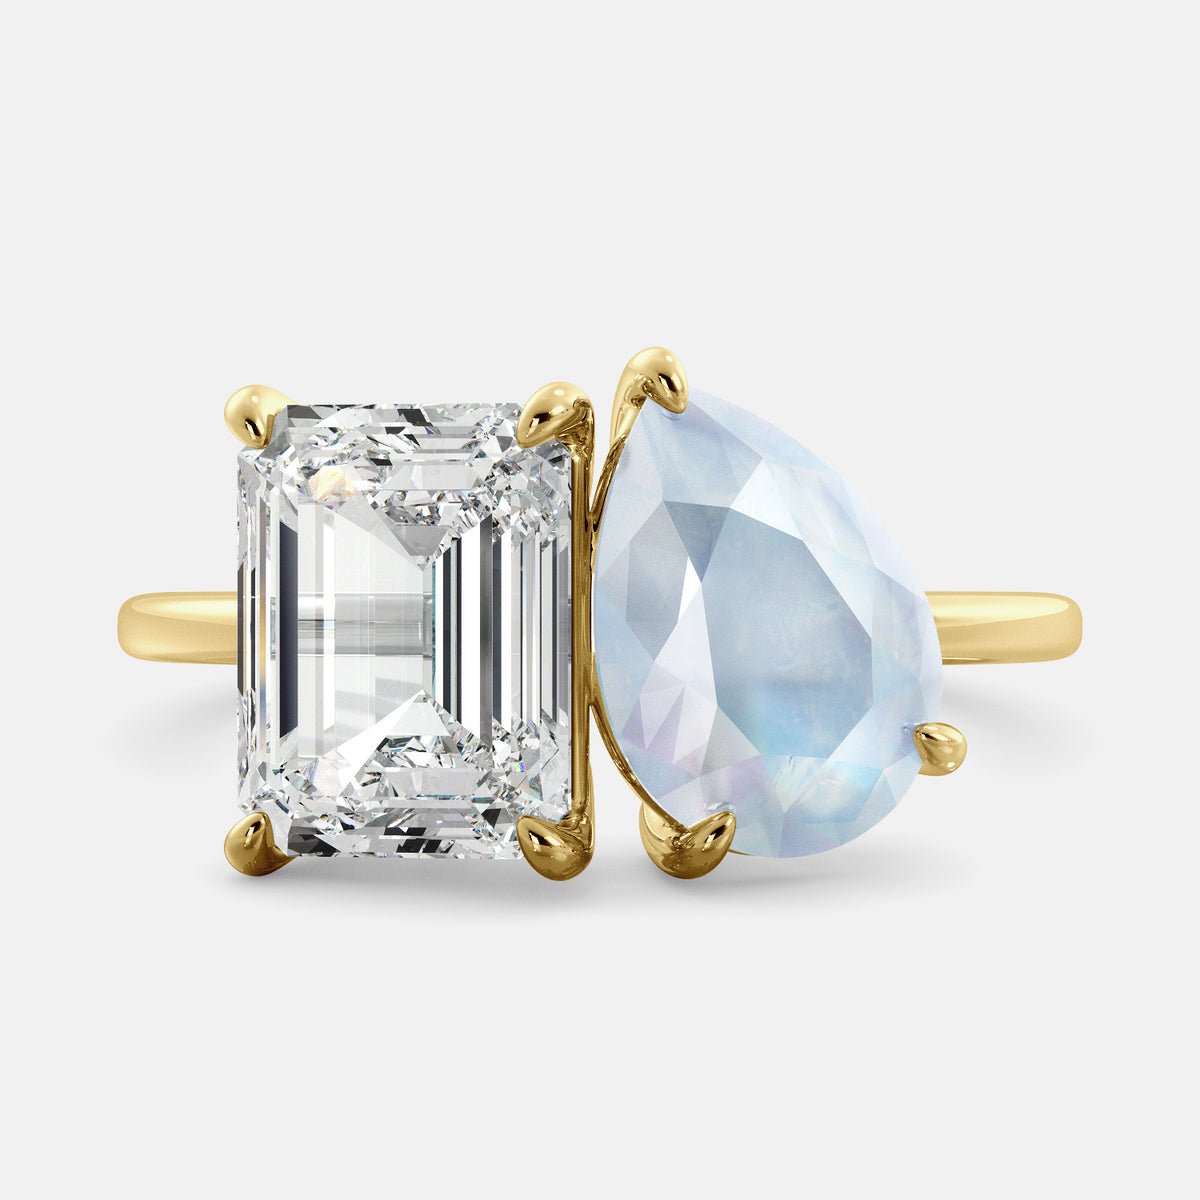 A toi et moi ring with an emerald-cut white topaz and a pear-cut gemstone. The emerald-cut morganite is set on the left of the ring, and the pear-cut gemstone is set on the right. The ring is made of recycled yellow gold and has a simple, elegant design. The pear-cut gemstone can be customized. **Here are some additional details about the image:** * The emerald-cut white topaz is a birthstone for April. * The pear-cut gemstone can be customized to any stone of your choice.